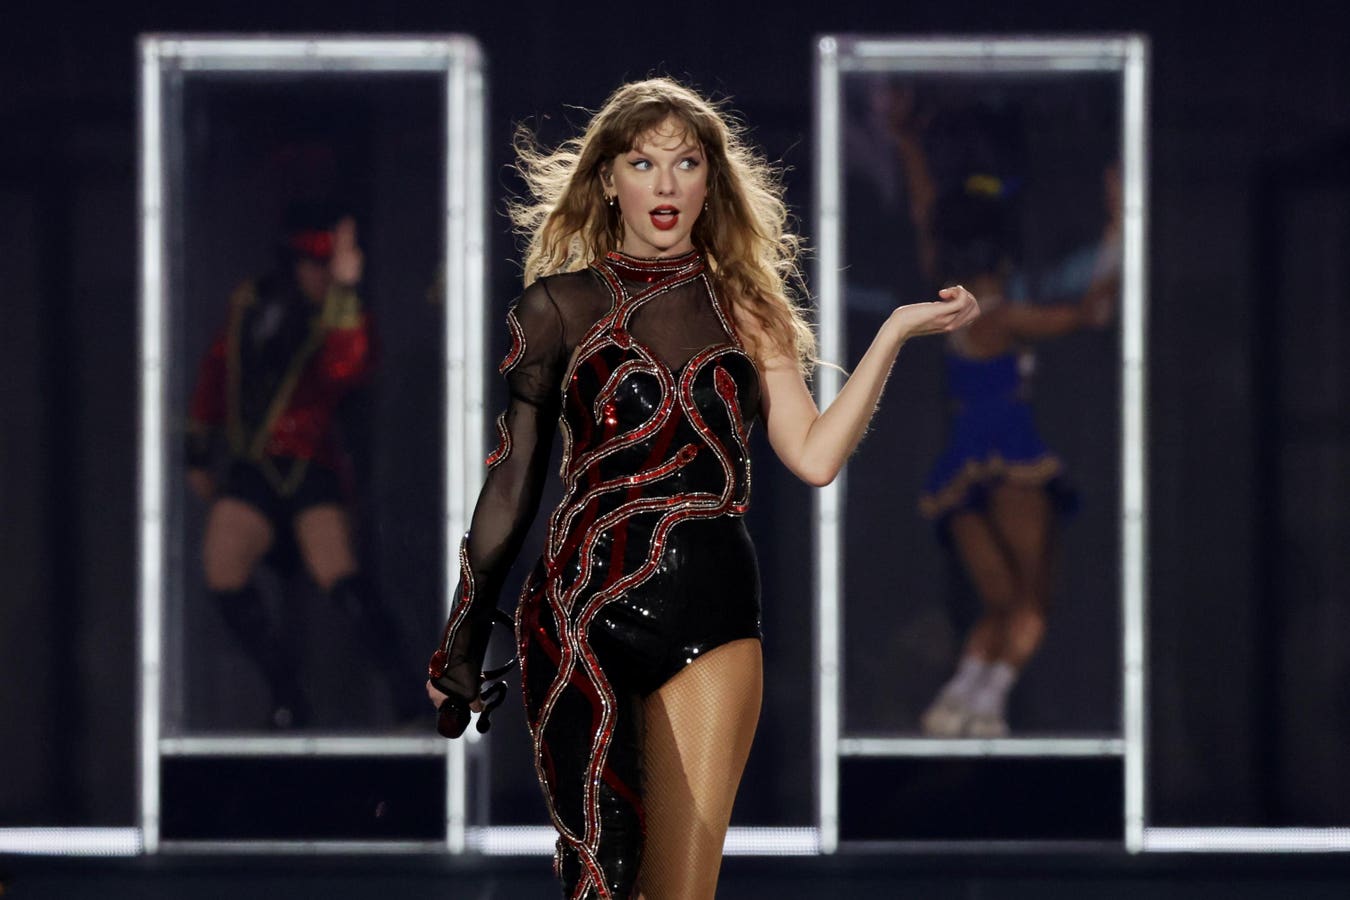 Taylor Swift Exhibition To Open At London’s V&A Museum